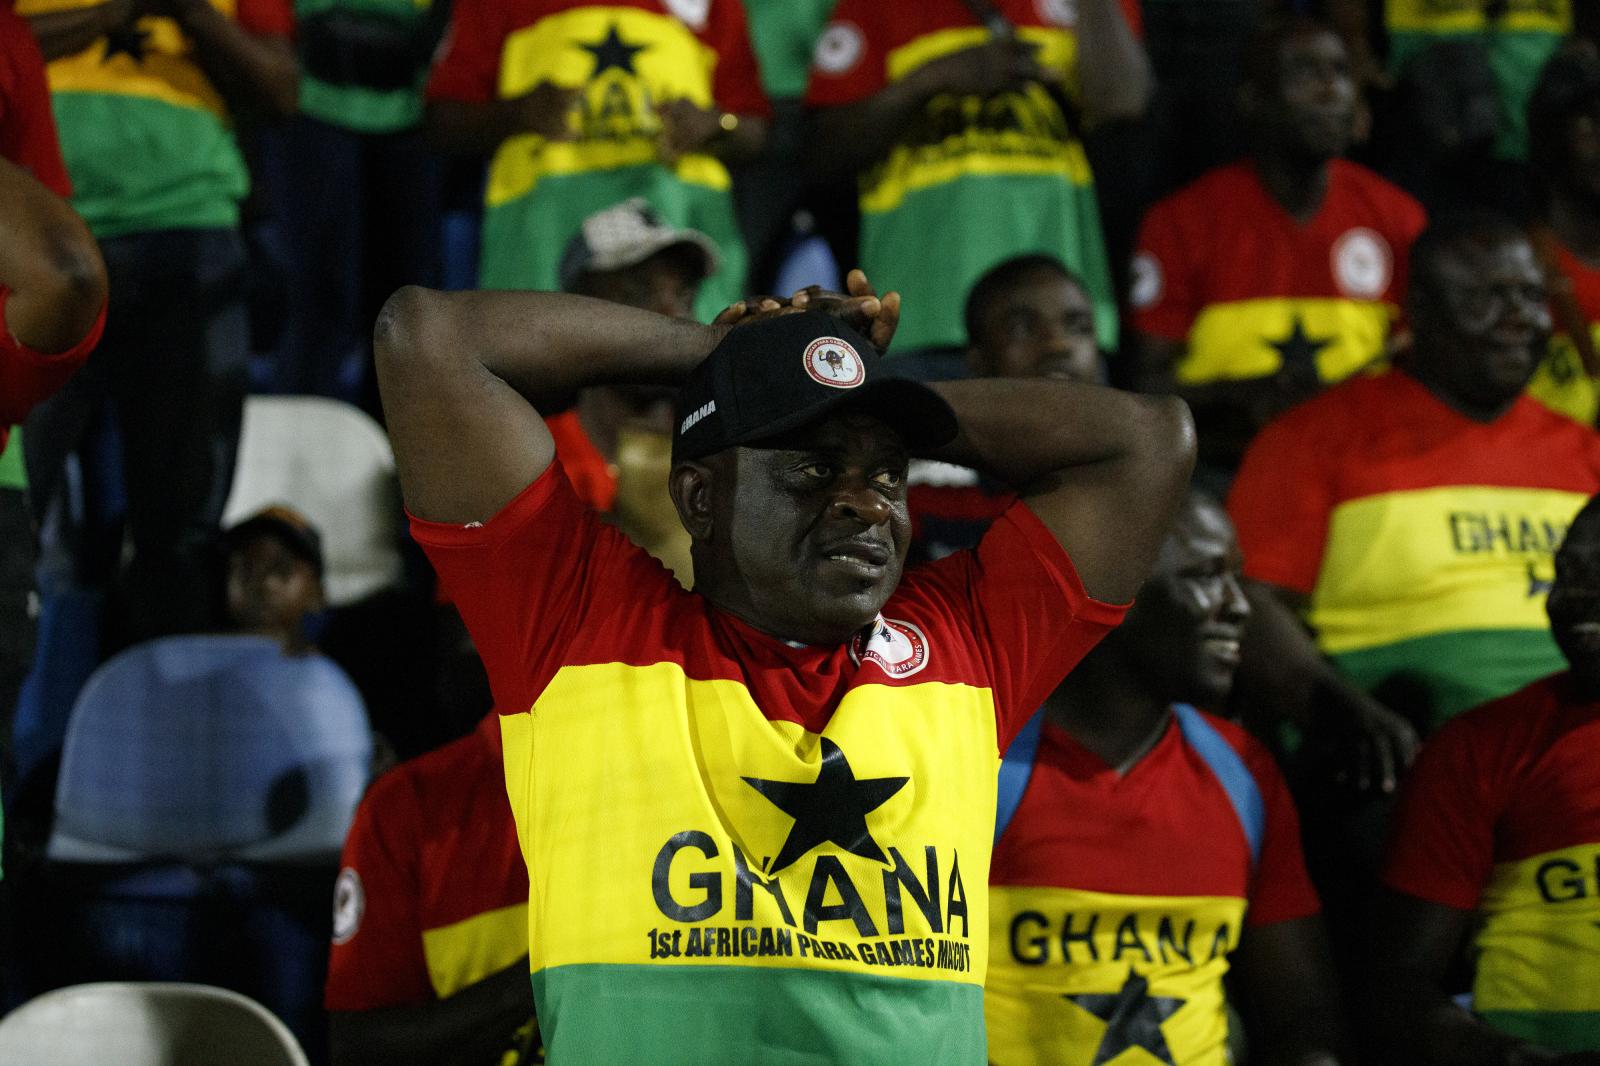 Image from First African Para Games  - A Ghanaian fan react during the amputee football game...